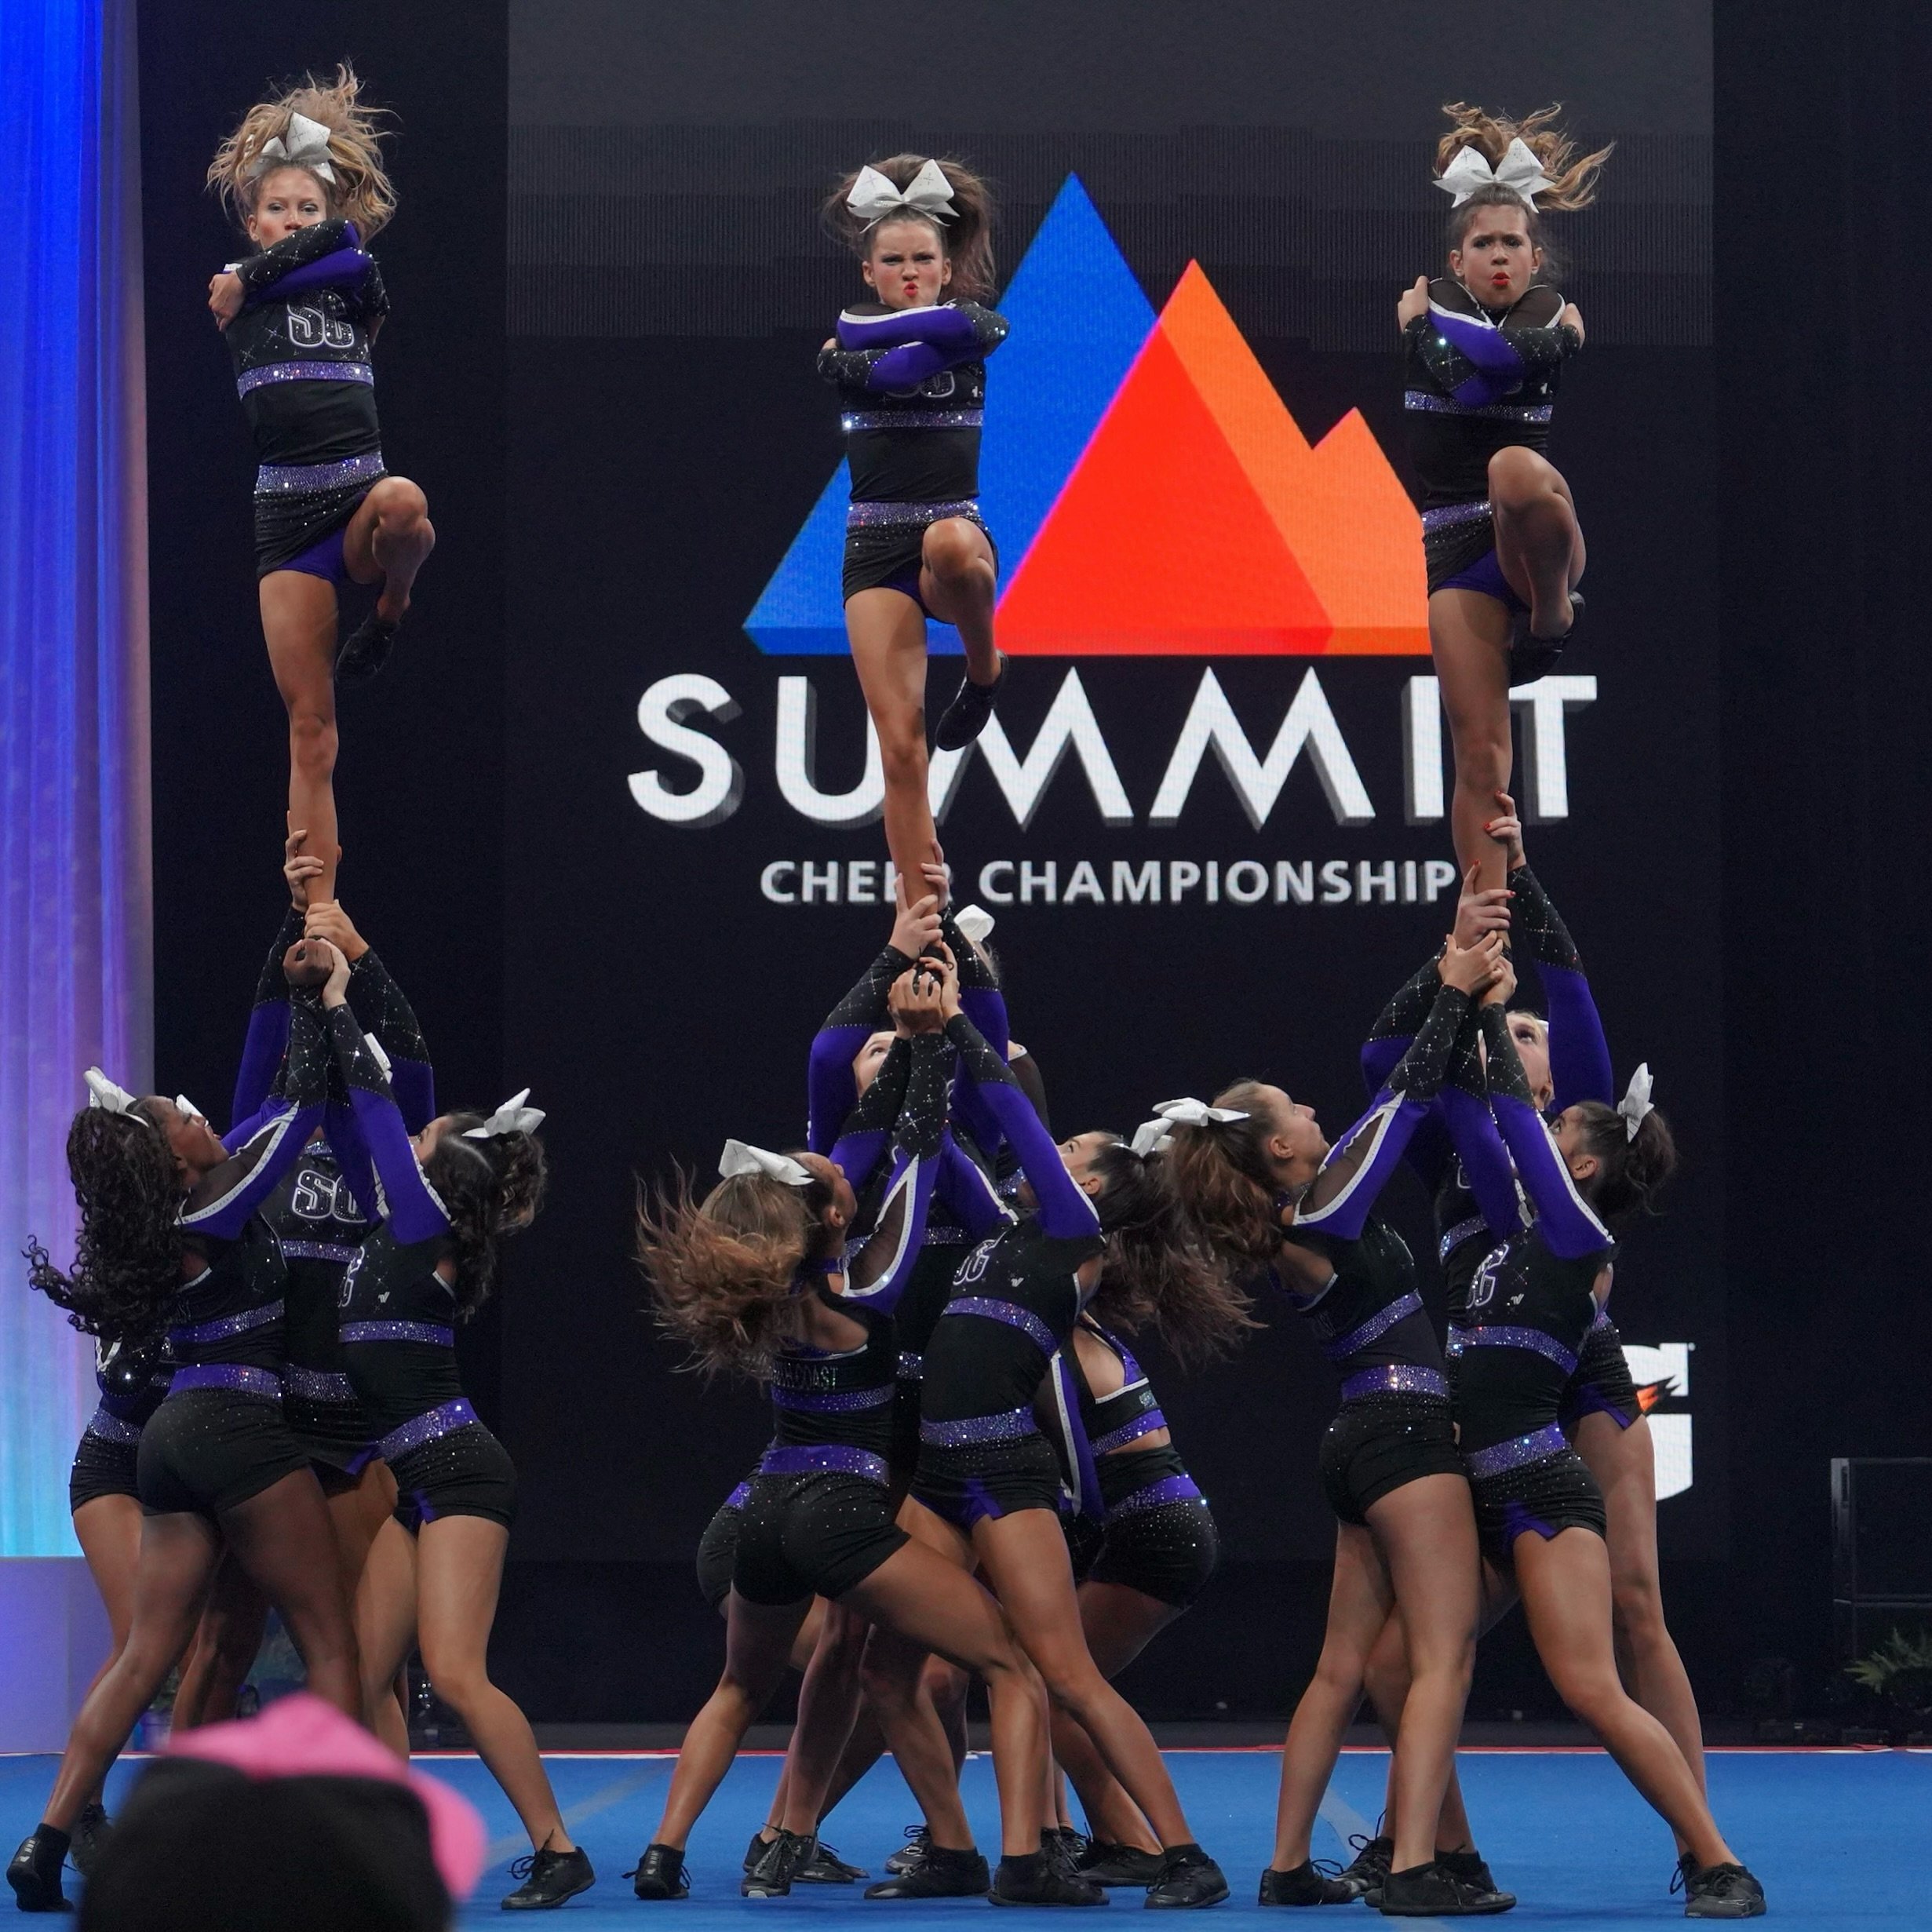 Feeling fierce because all 6 teams are moving on to finals! The Coast is ready to bring it tomorrow. 💜🖤 #SouthCoastCheer #CFIO #EveryoneGetsBetterAtSCC